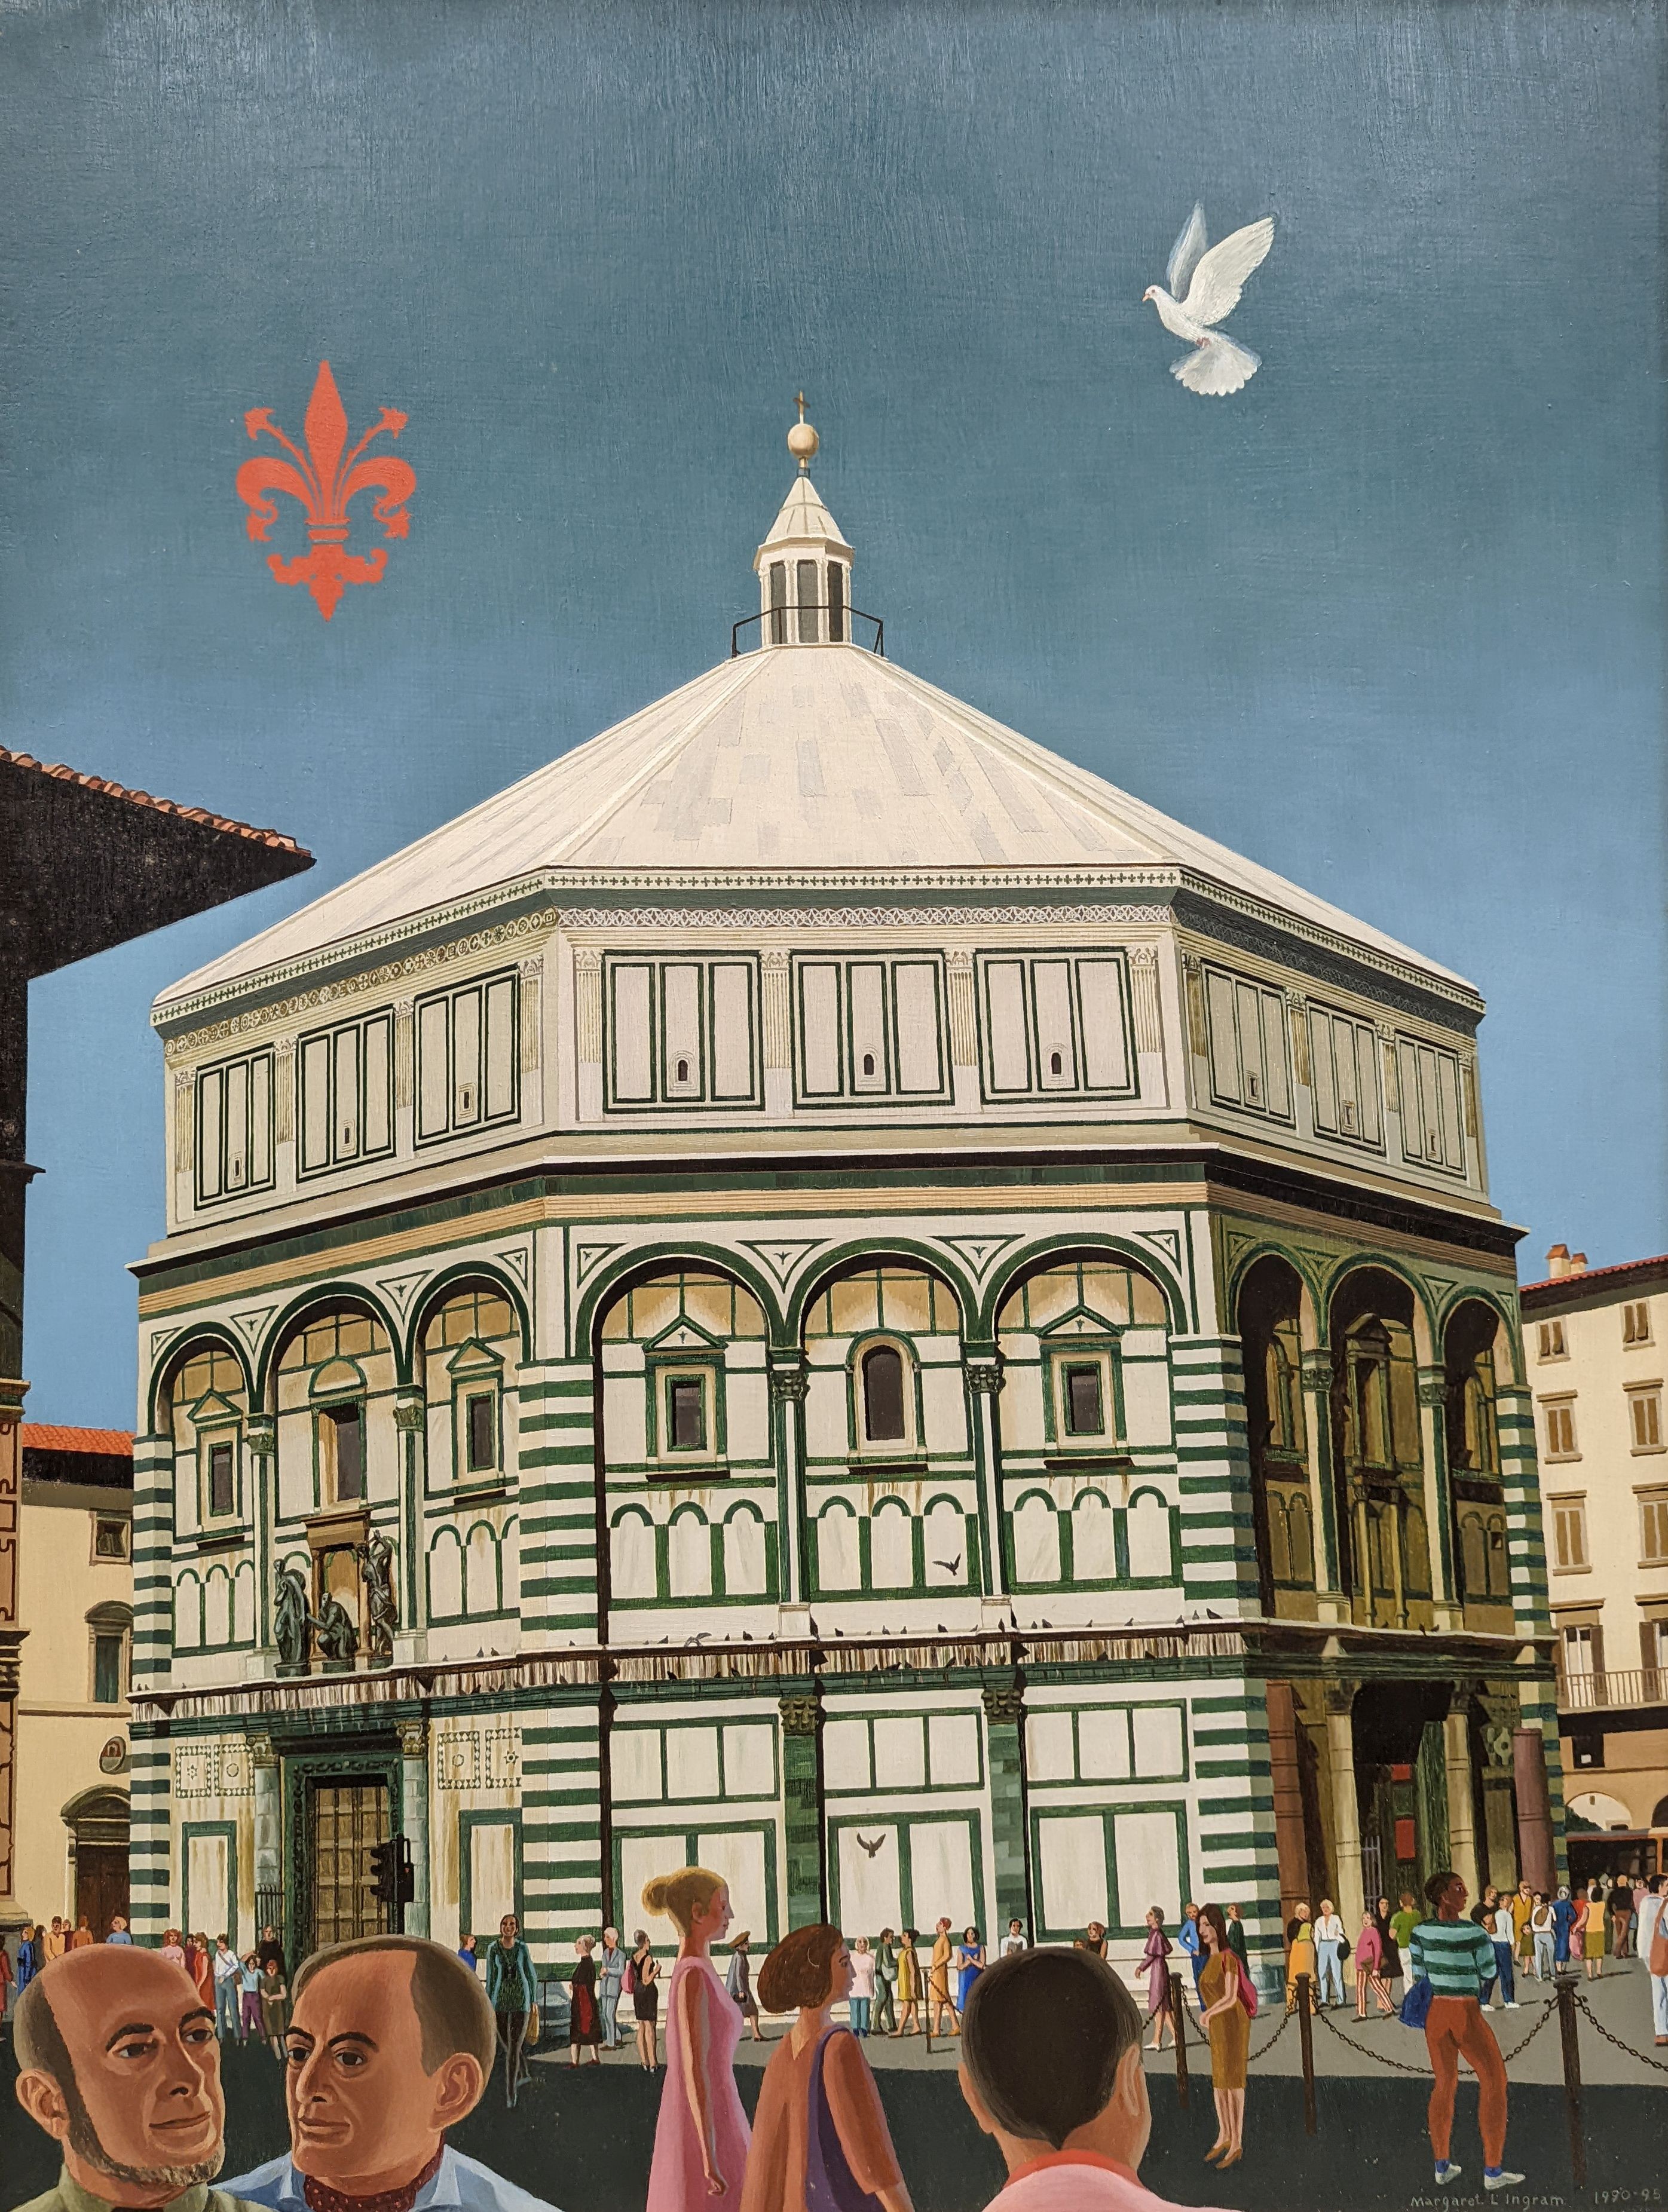 Margaret Ingram (1930-), oil on board, Ronald Miller and Robert Erich Wolf in front of The Baptistry Florence, Italy, signed and dated 1990-95, 70 x 53.5cm